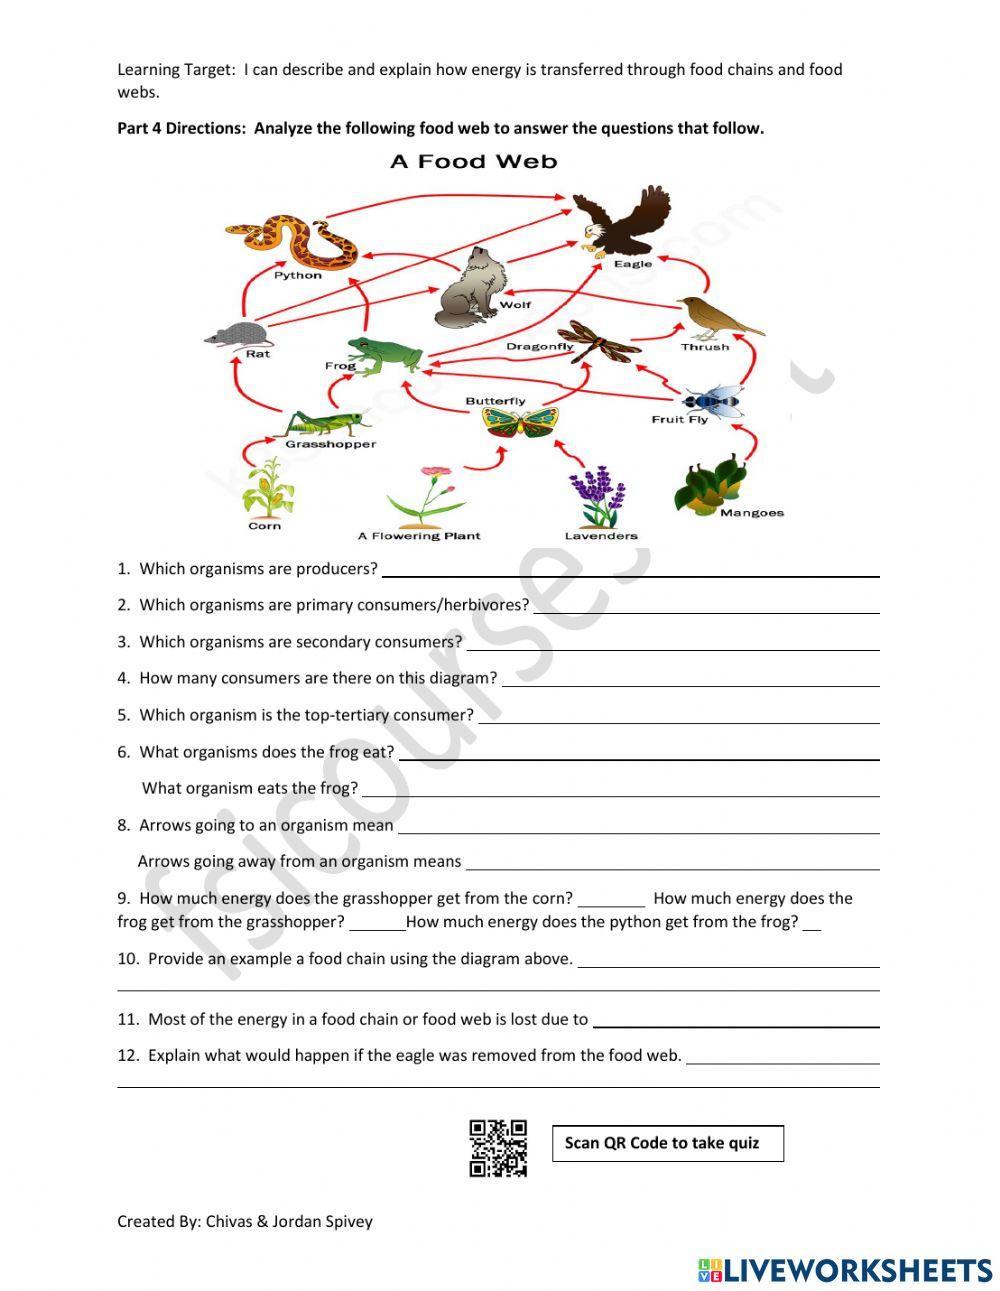 Food Chains - Food Webs Interactive Activity